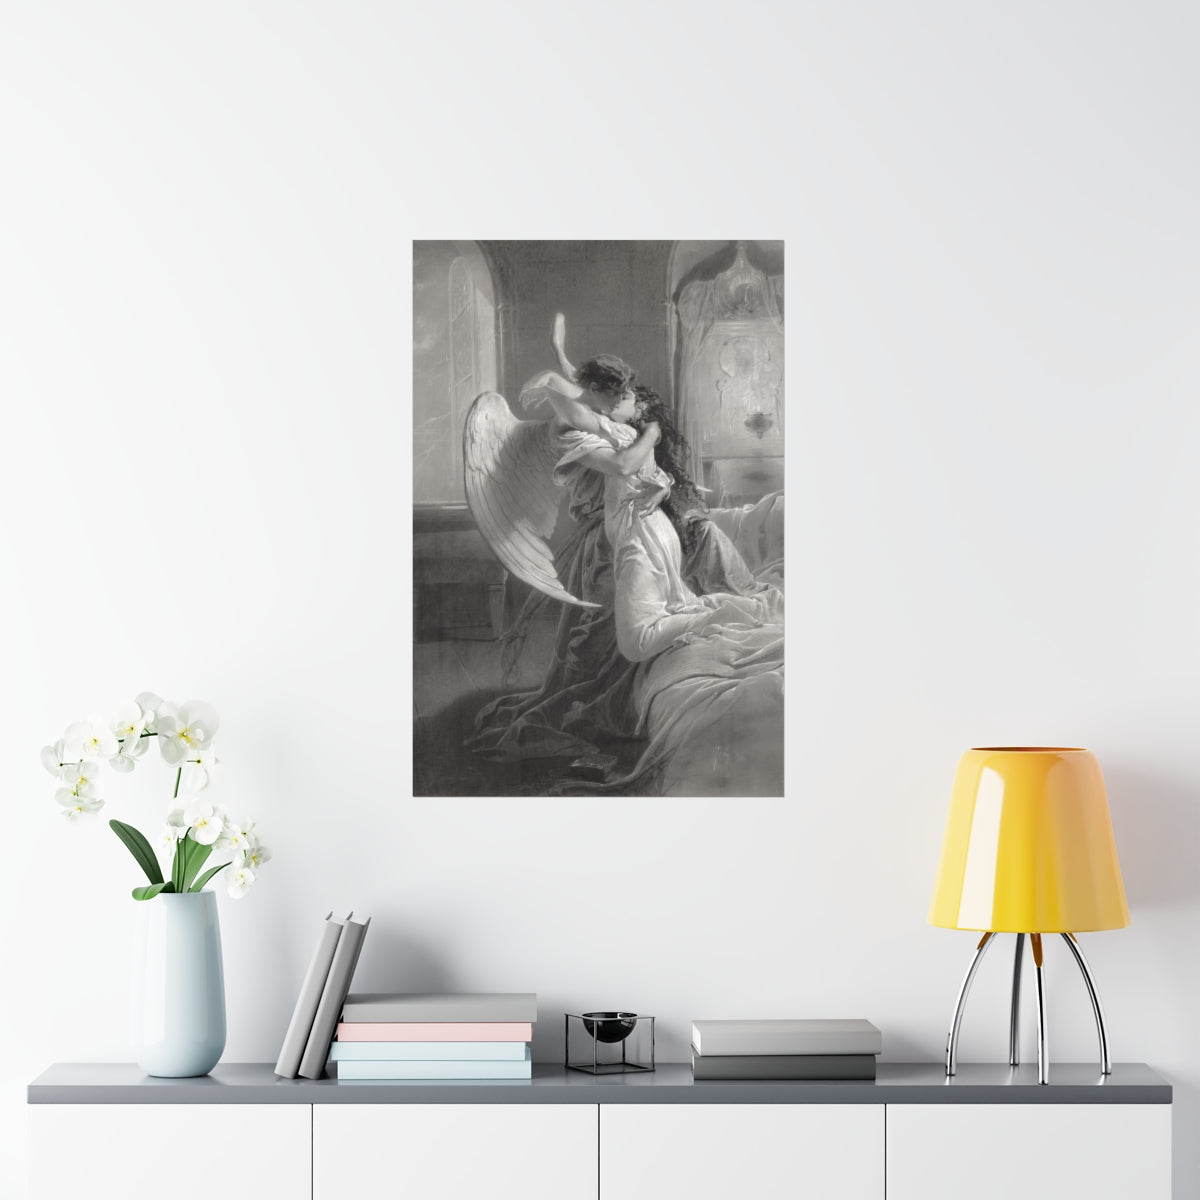 Mihaly Von Zichy | Romantic Encounter | Angel Kiss Print Poster